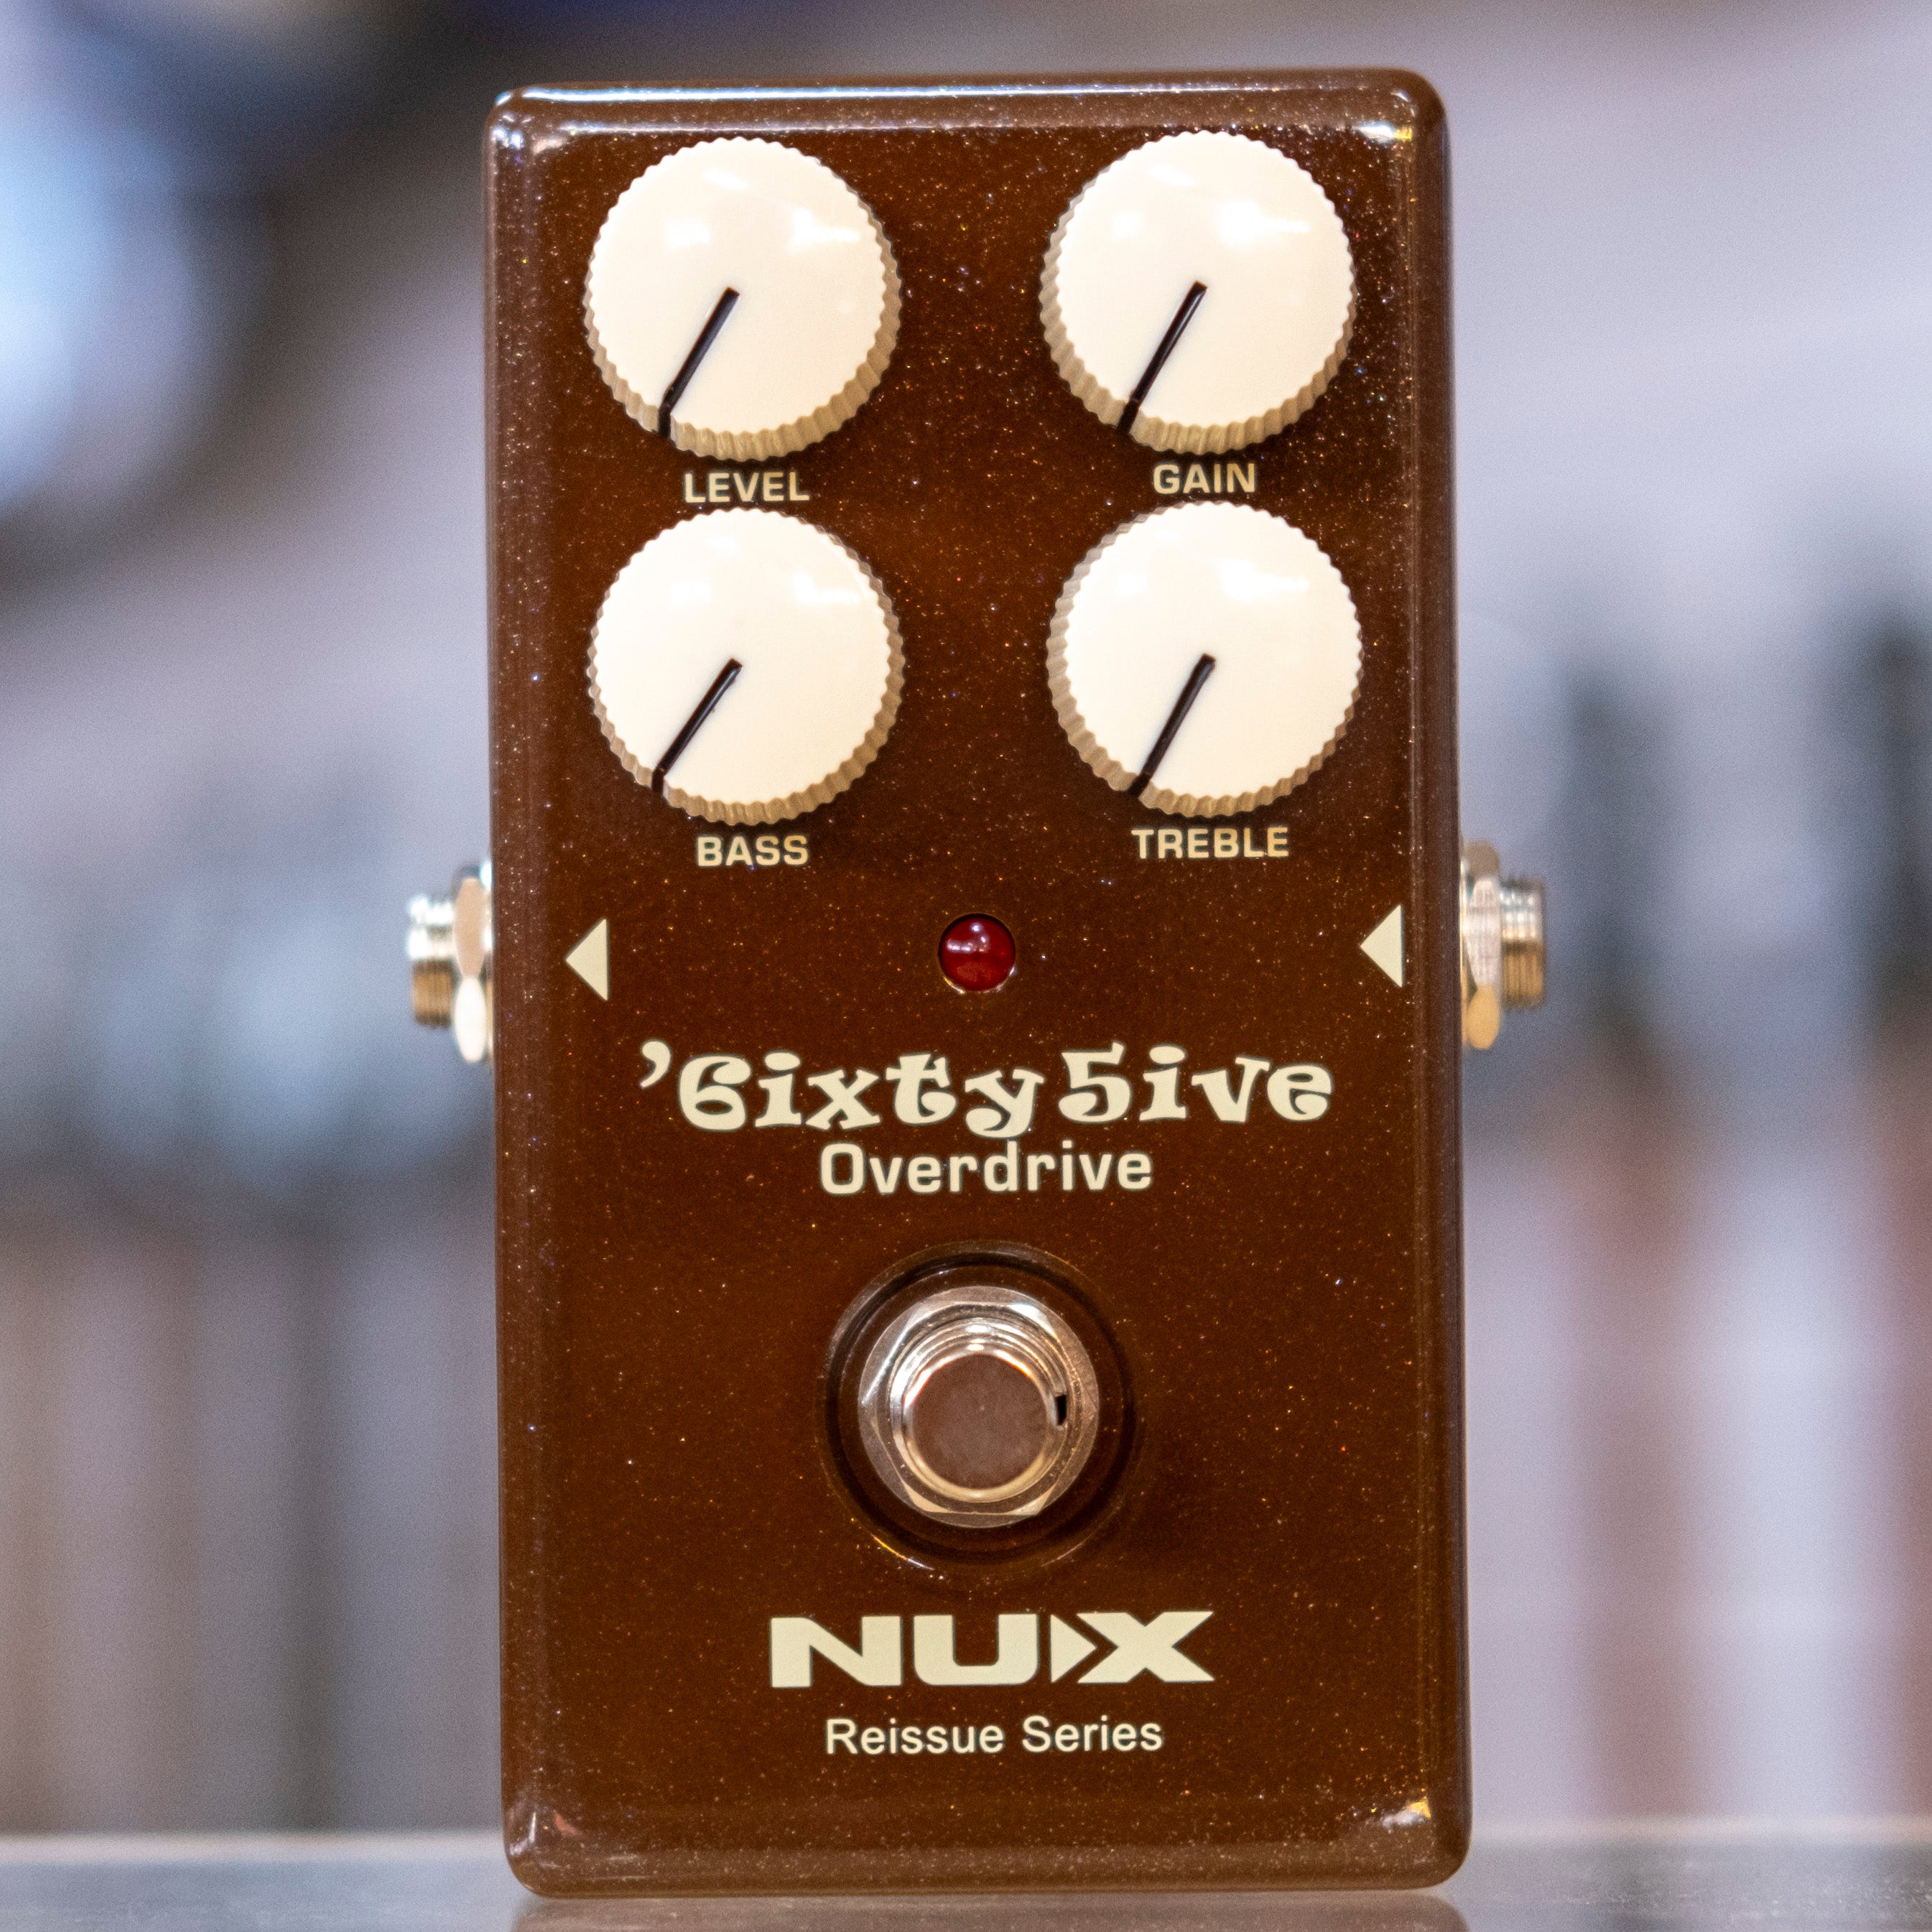 NUX Reissue Series '6ixty5ive Overdrive Pedal